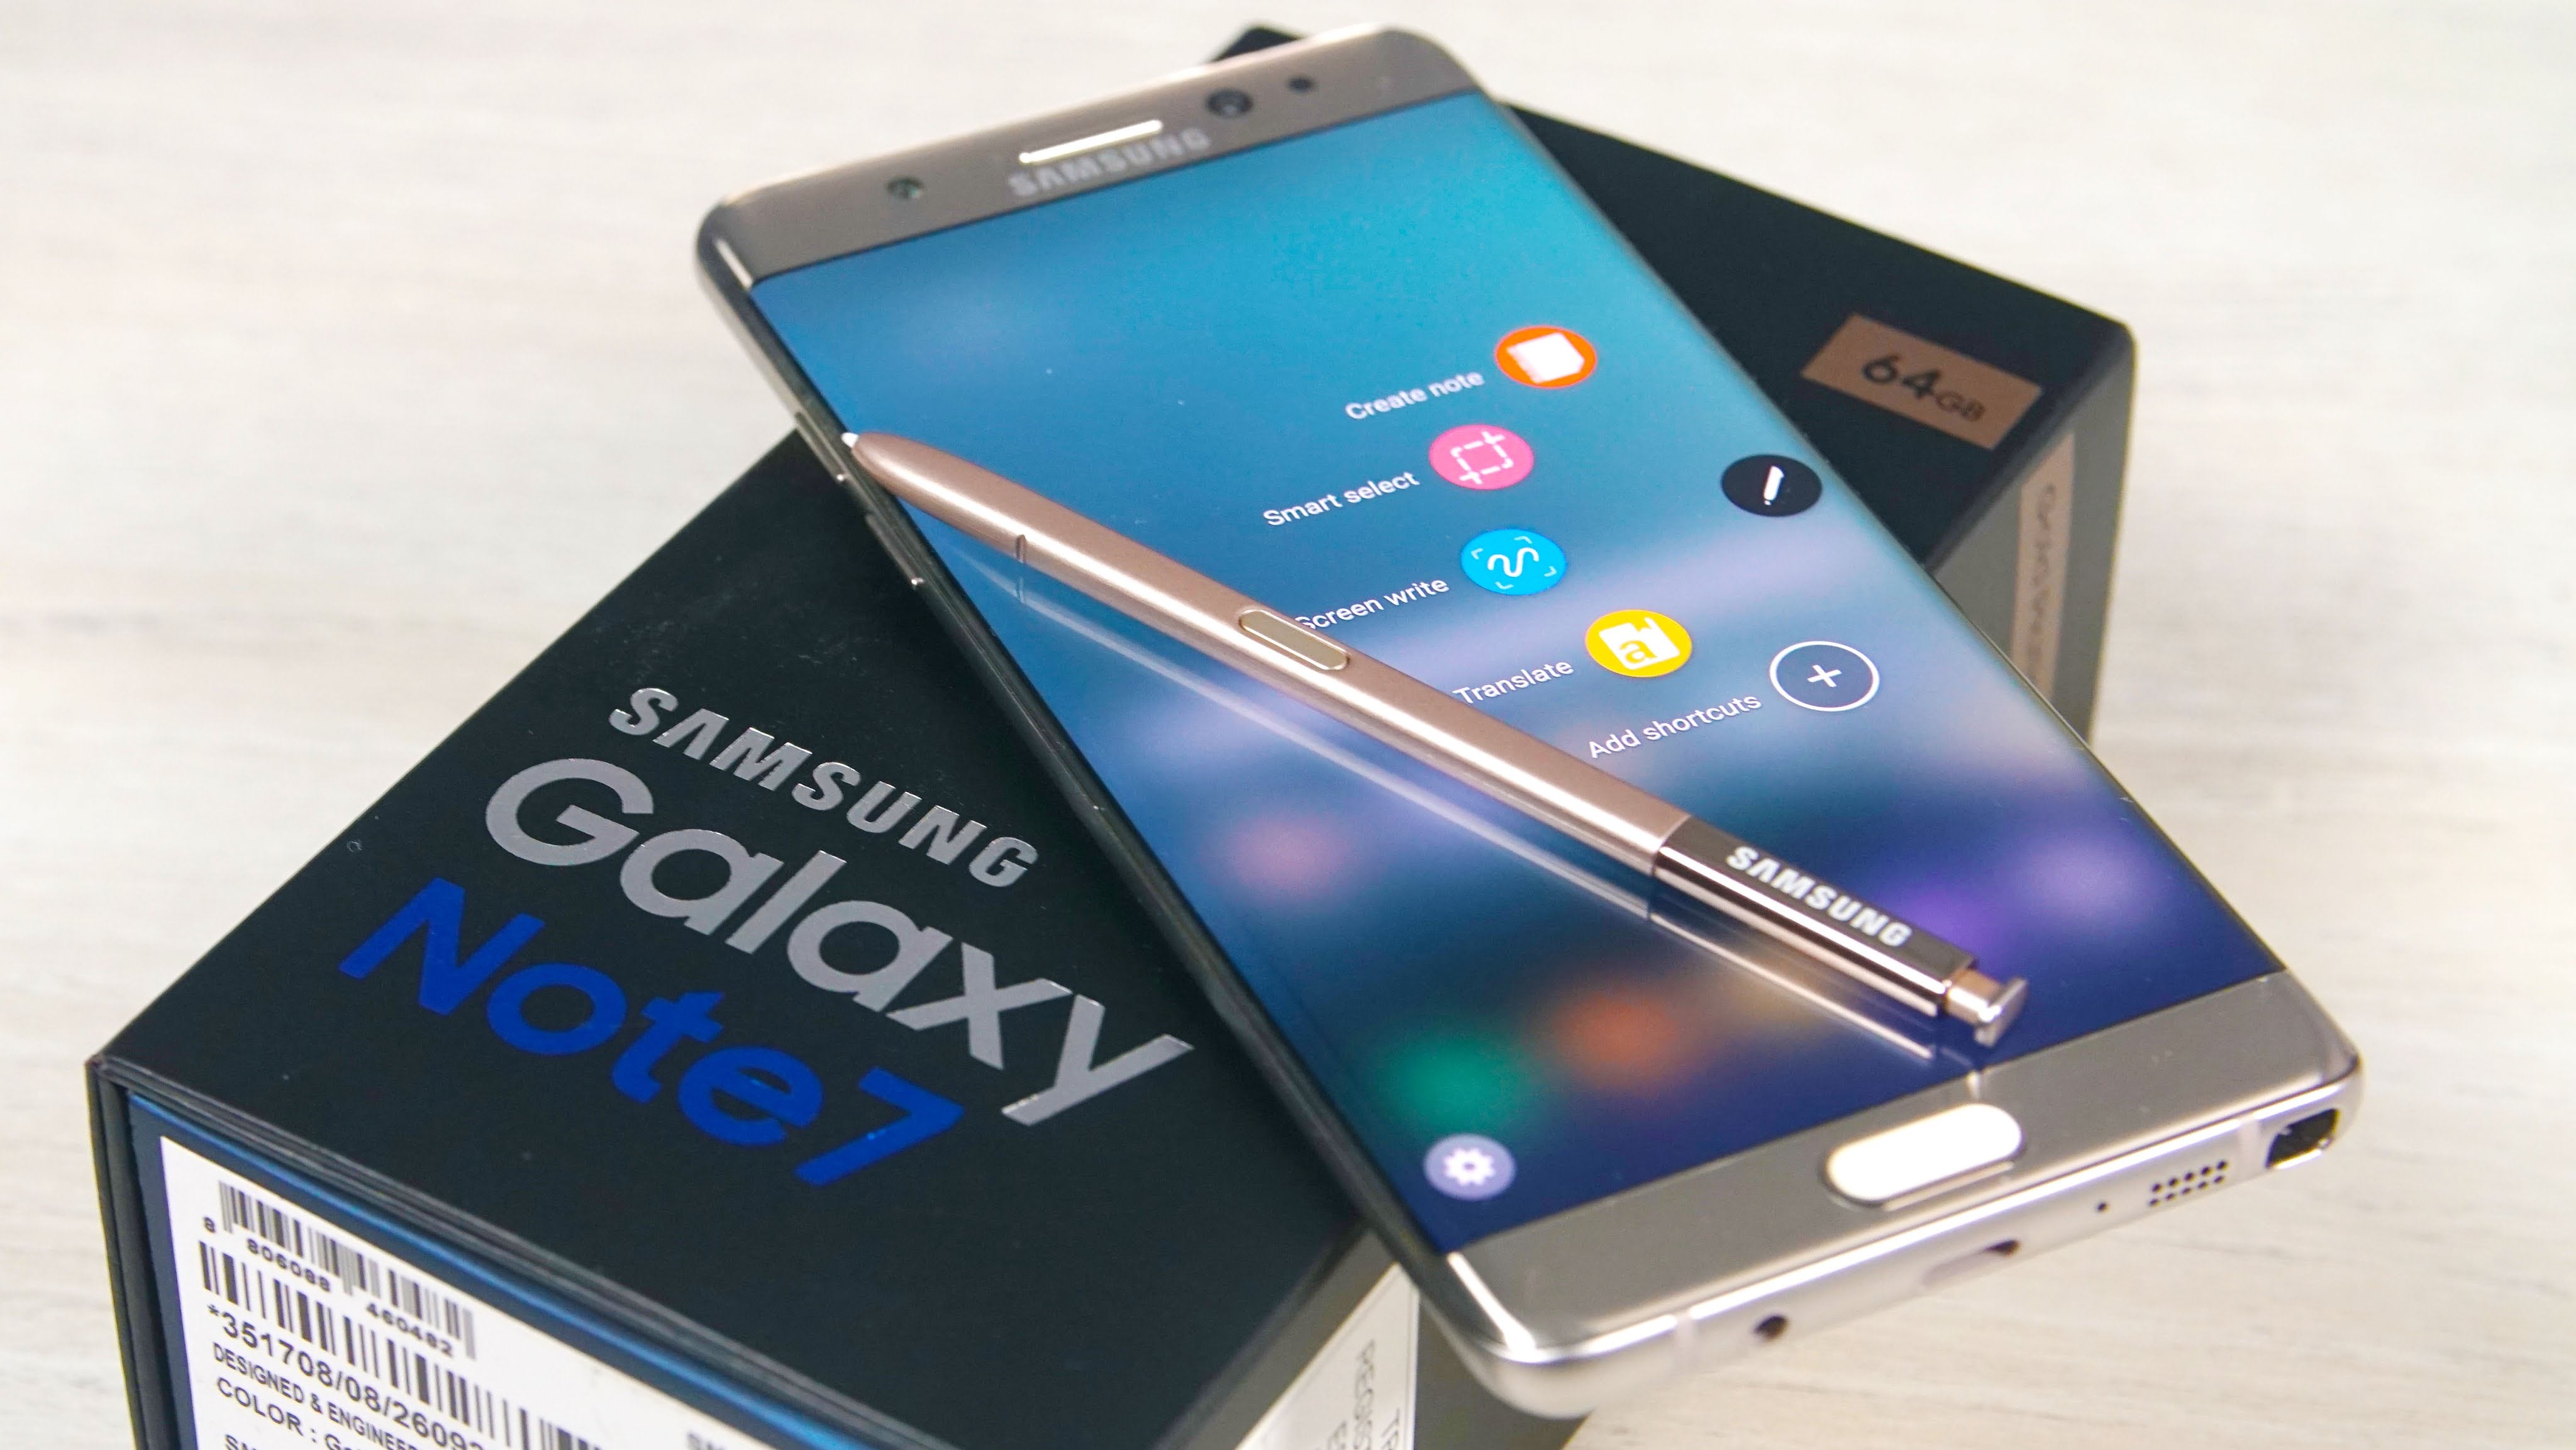 Samsung could sell some refurbished Galaxy Note 7 smartphone